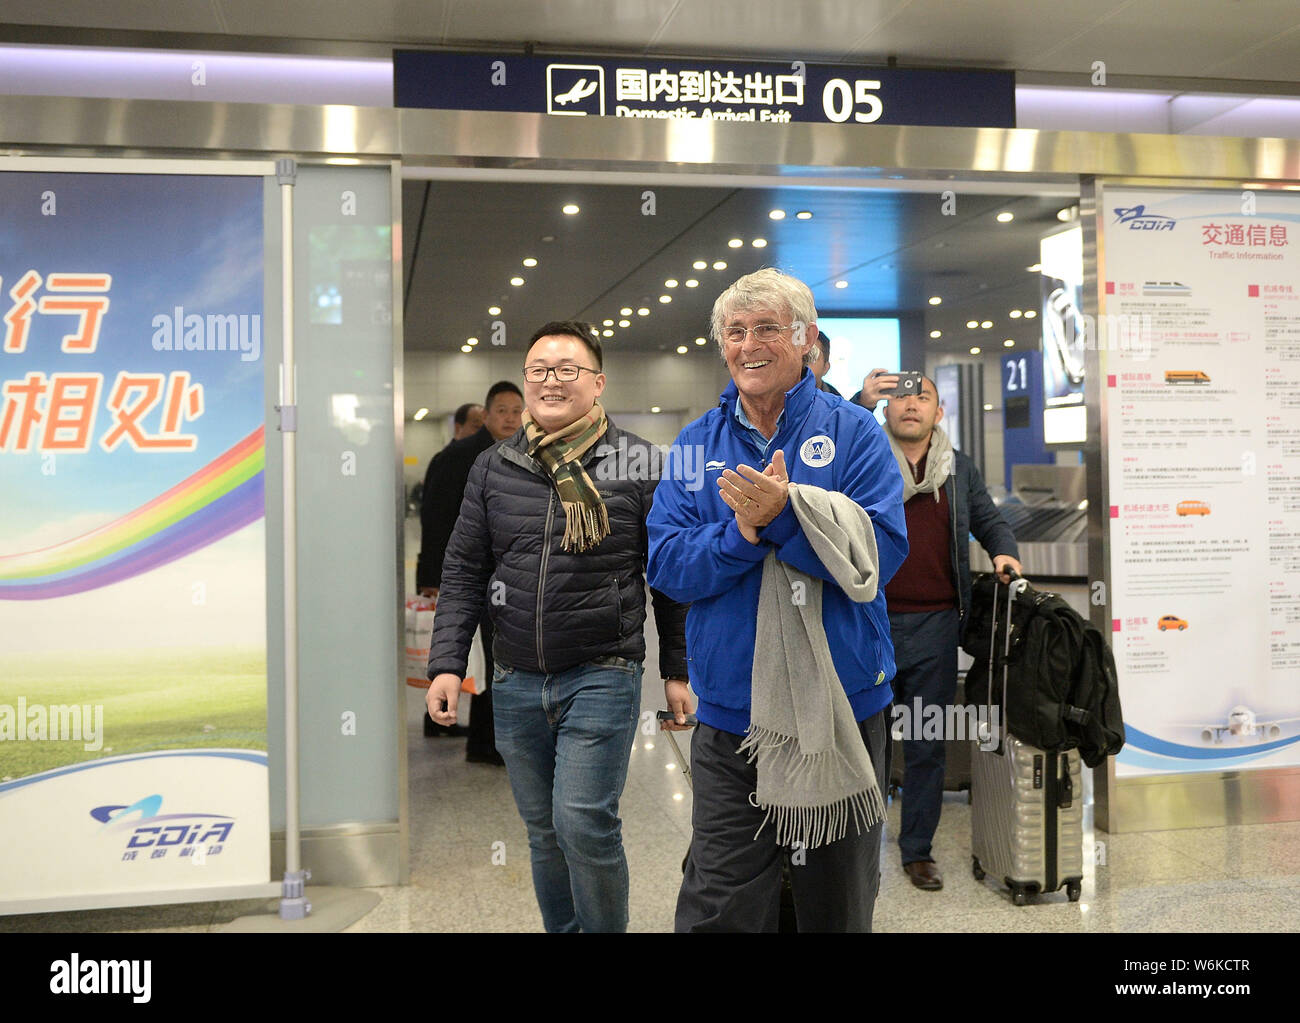 Serbian football coach and former player Bora Milutinovic is pictured as he arrives at the Chengdu Shuangliu International Airport in Chengdu city, so Stock Photo